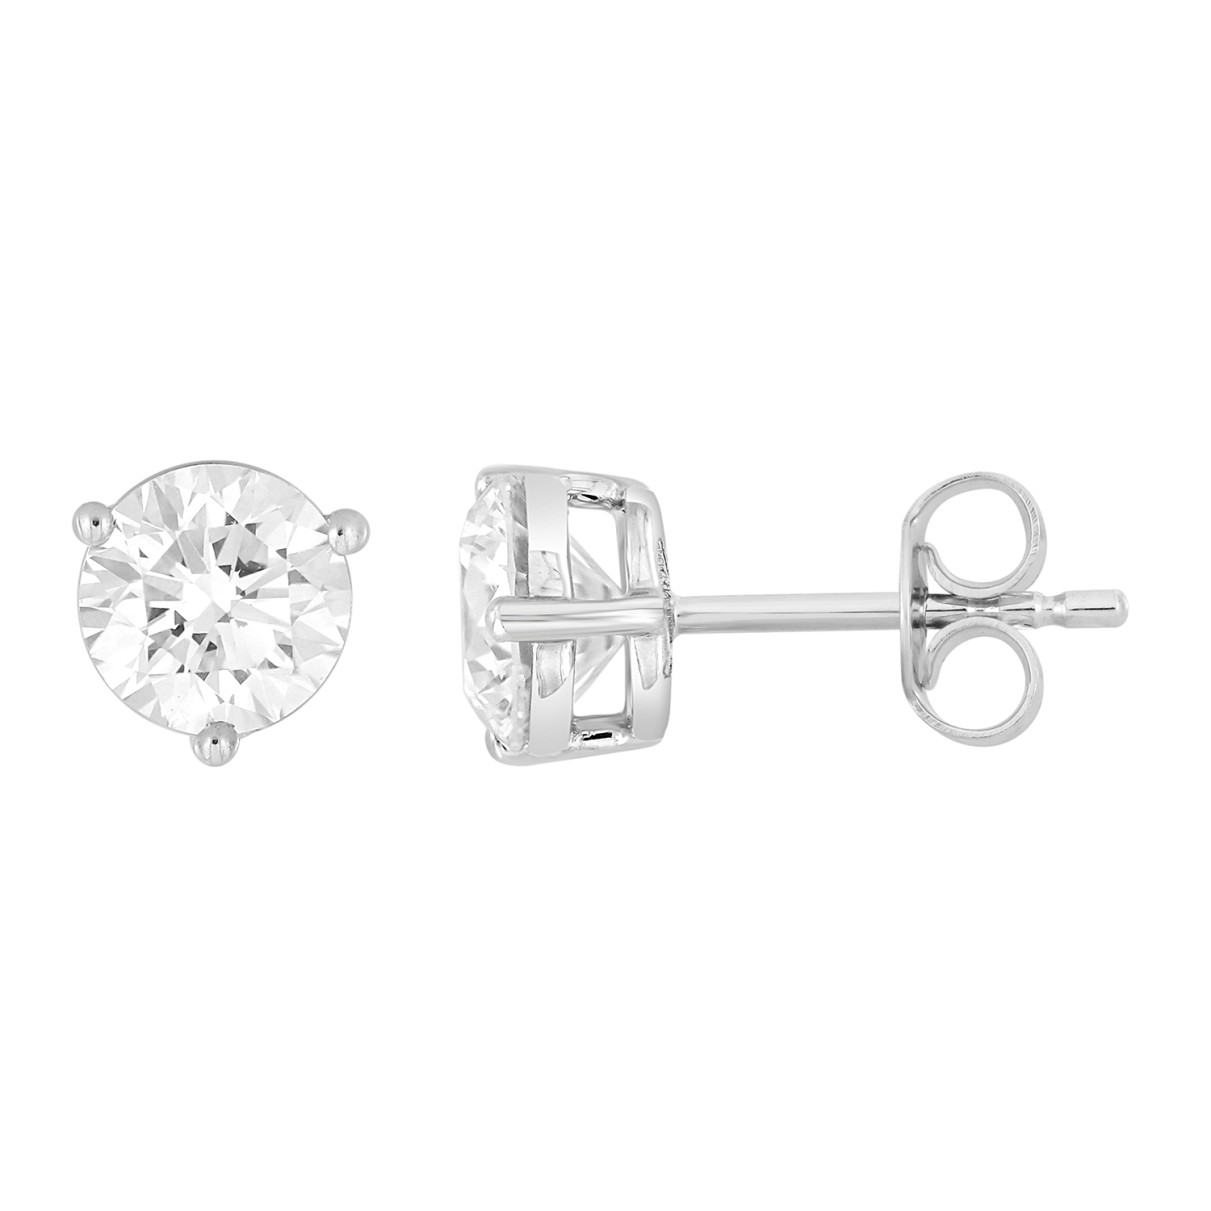 LADIES SOLITAIRE EARRINGS 2 1/2CT ROUND DIAMOND 14K WHITE GOLD 